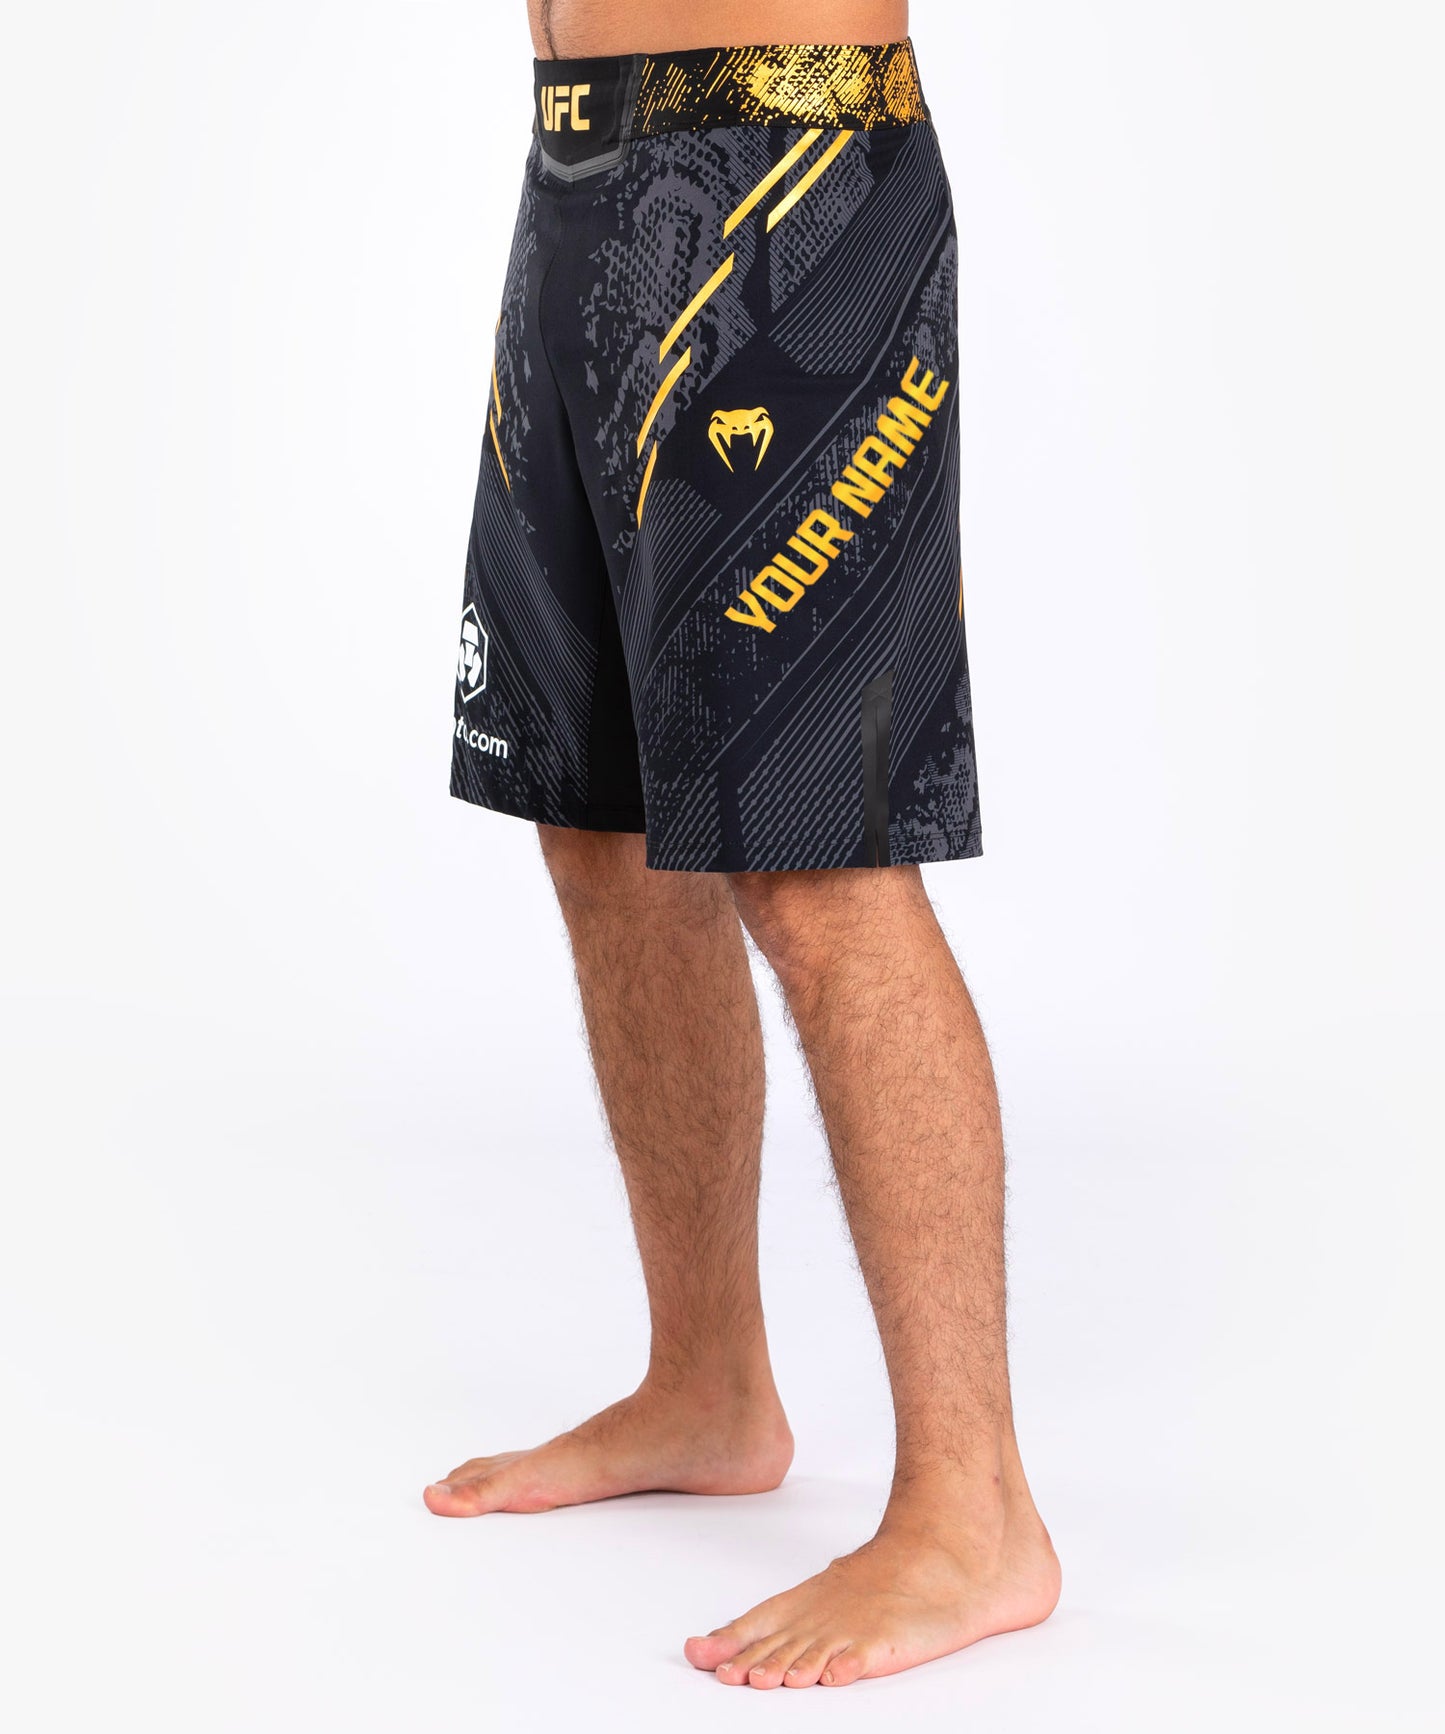 UFC Adrenaline by Venum Personalized Authentic Fight Night Men's Fight Short - Long Fit - Black/Gold